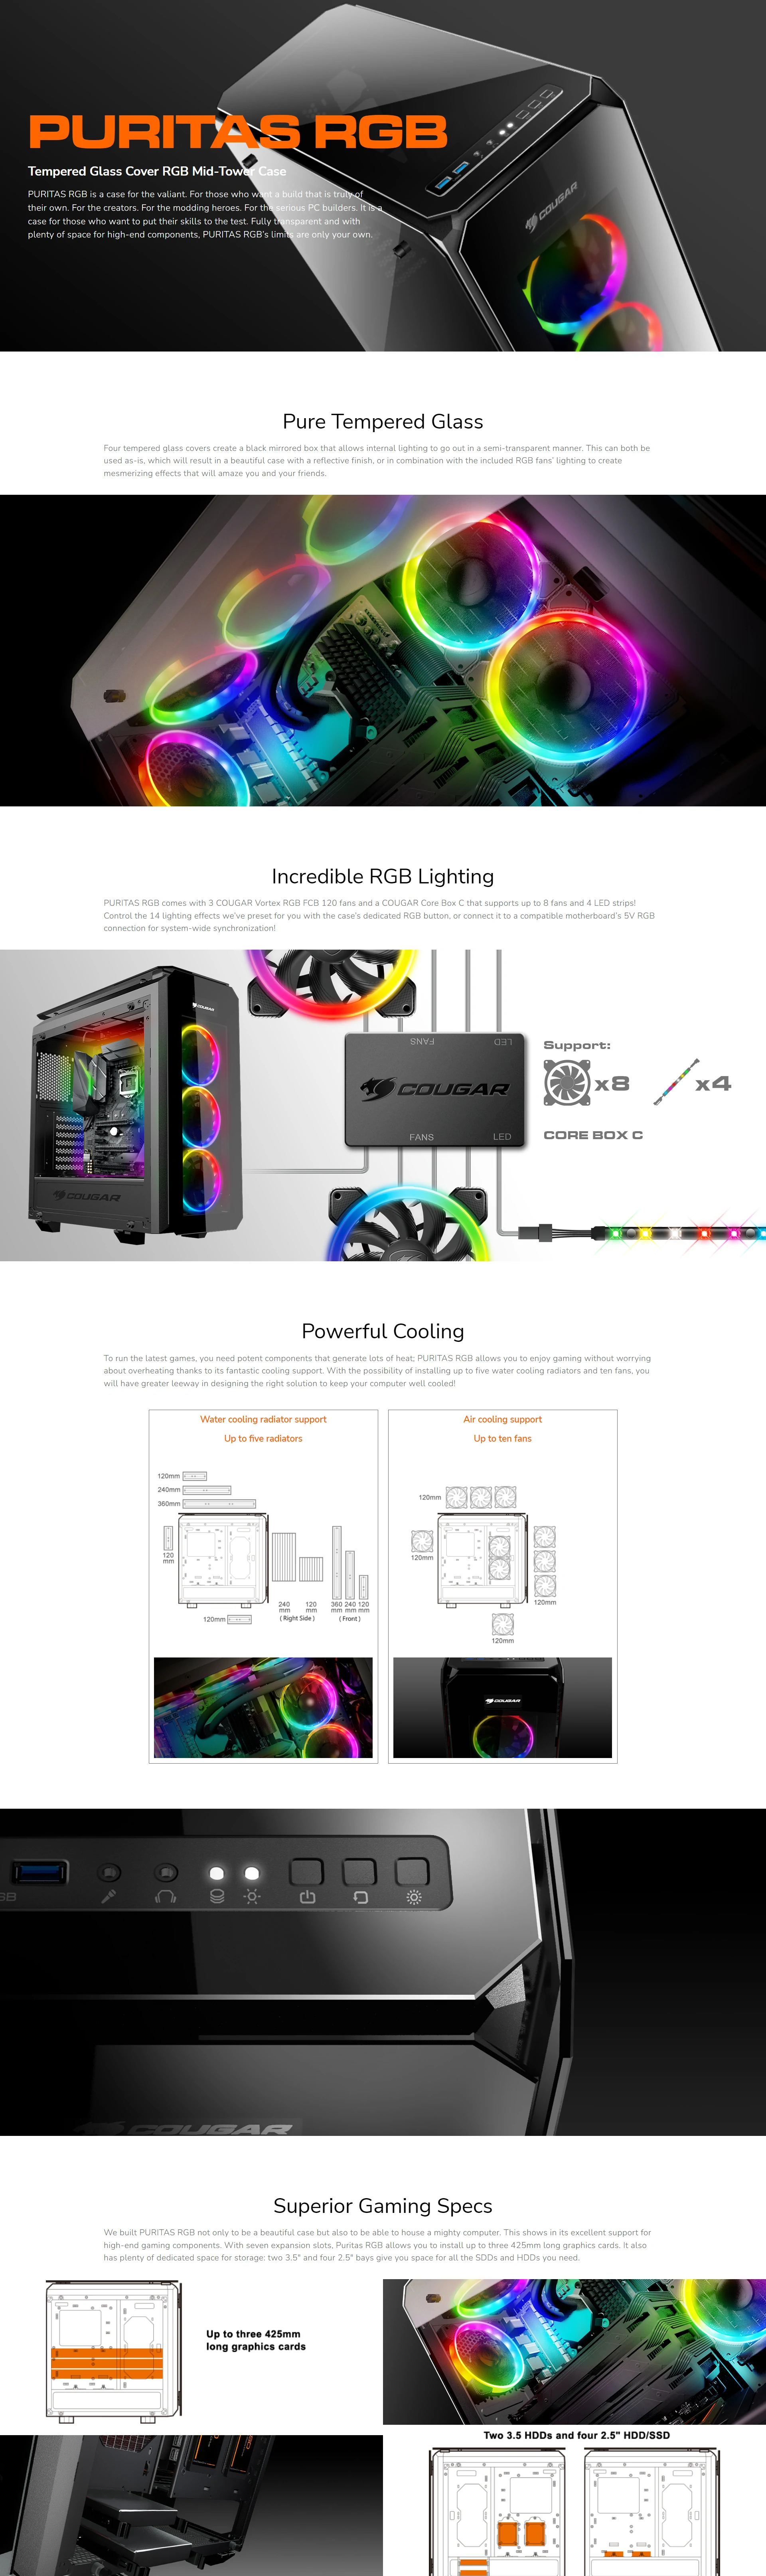 Overview - Cougar - Puritas Tempered Glass Cover RGB Mid-Tower Case